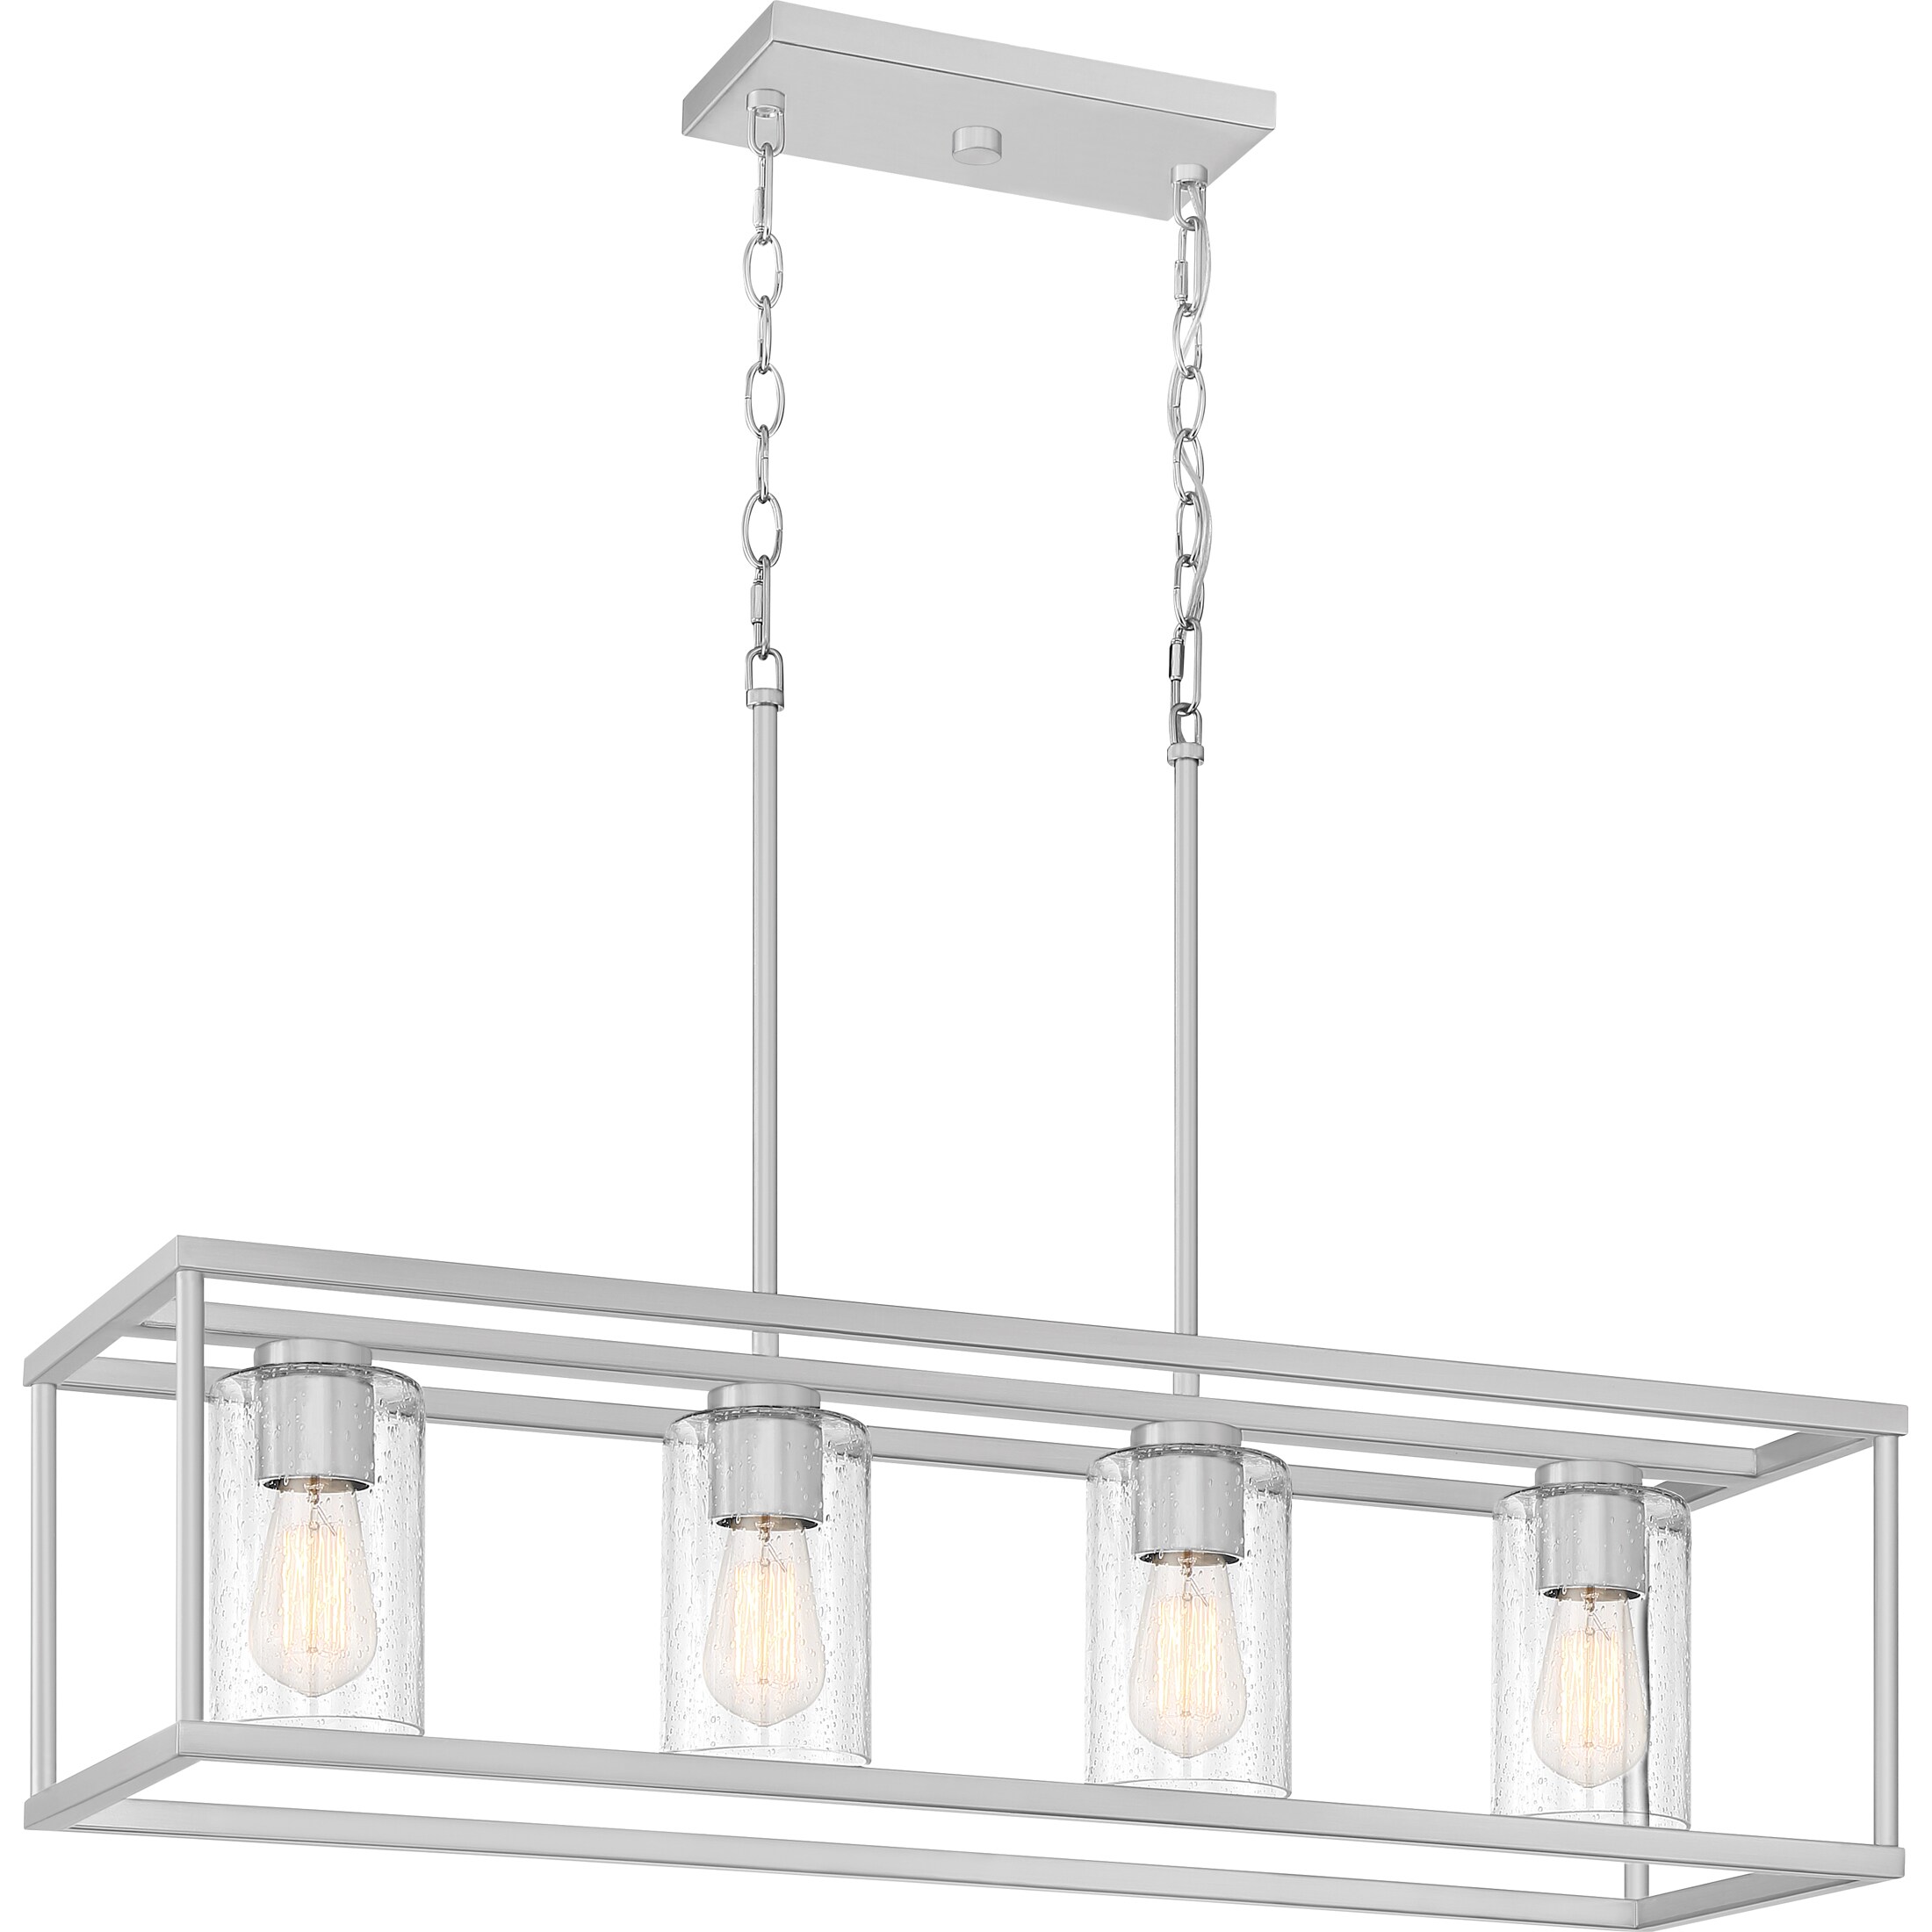 Quoizel Dover 4-Light Brushed Nickel Industrial Damp Rated